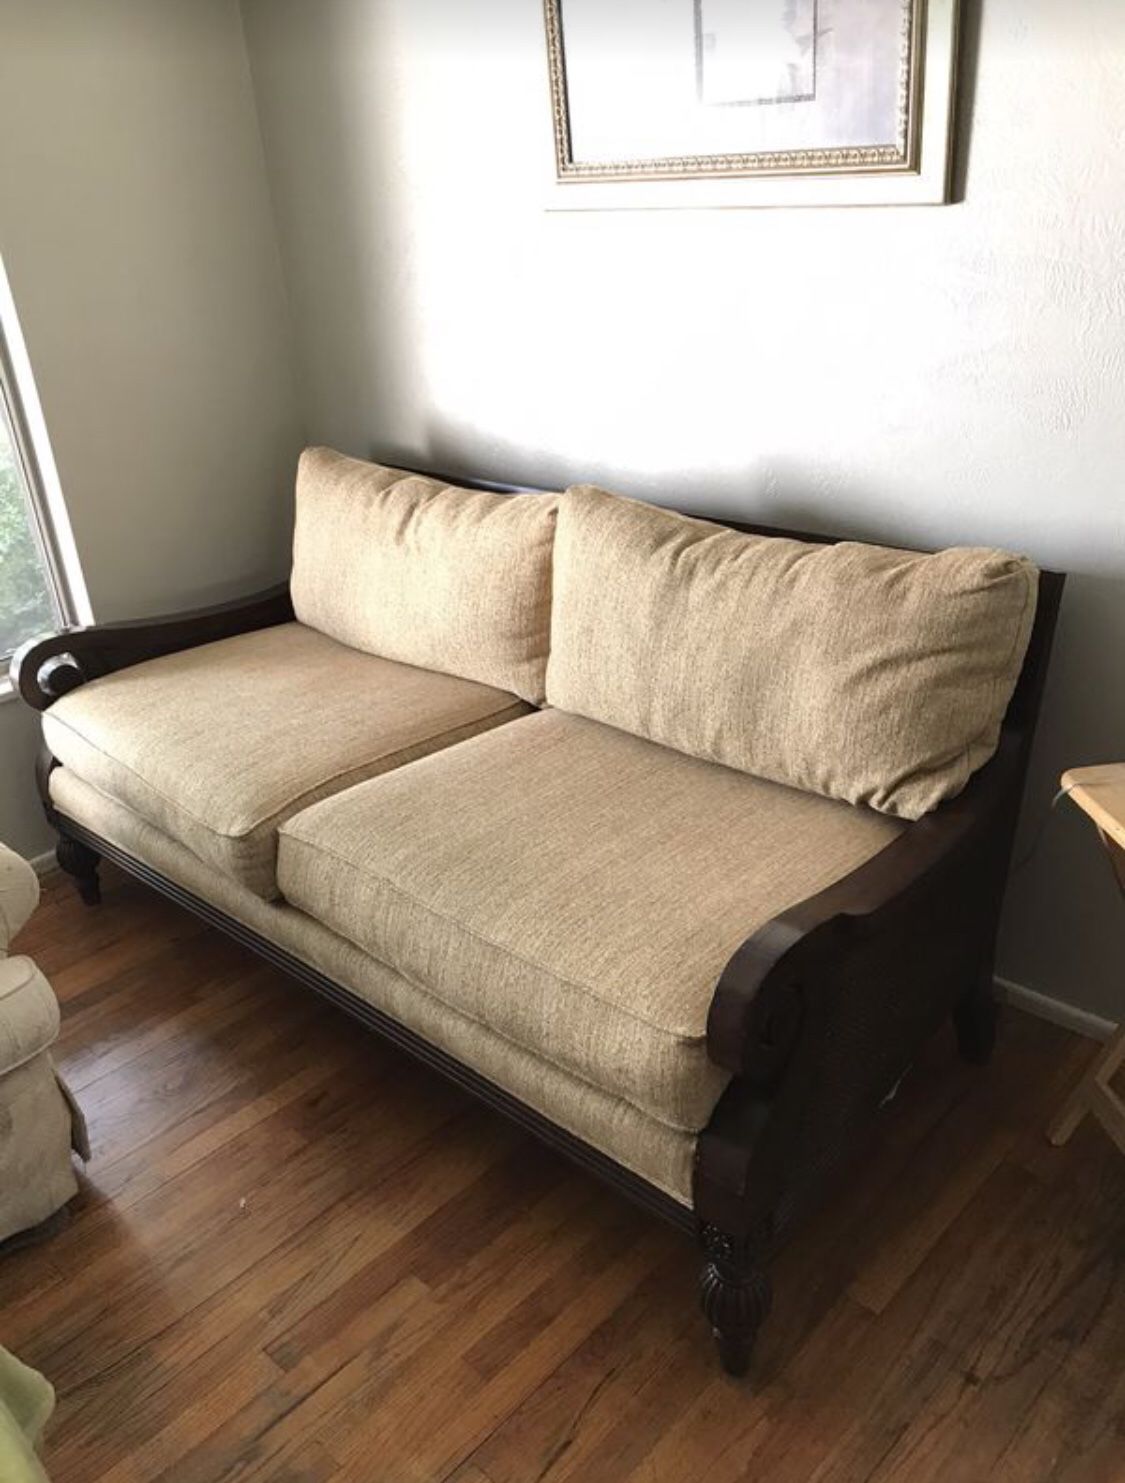 LIKE NEW NICE SOLID 3 SEATER COUCH W/GOLD PILLOWS PAID $1999.99 SELL FOR